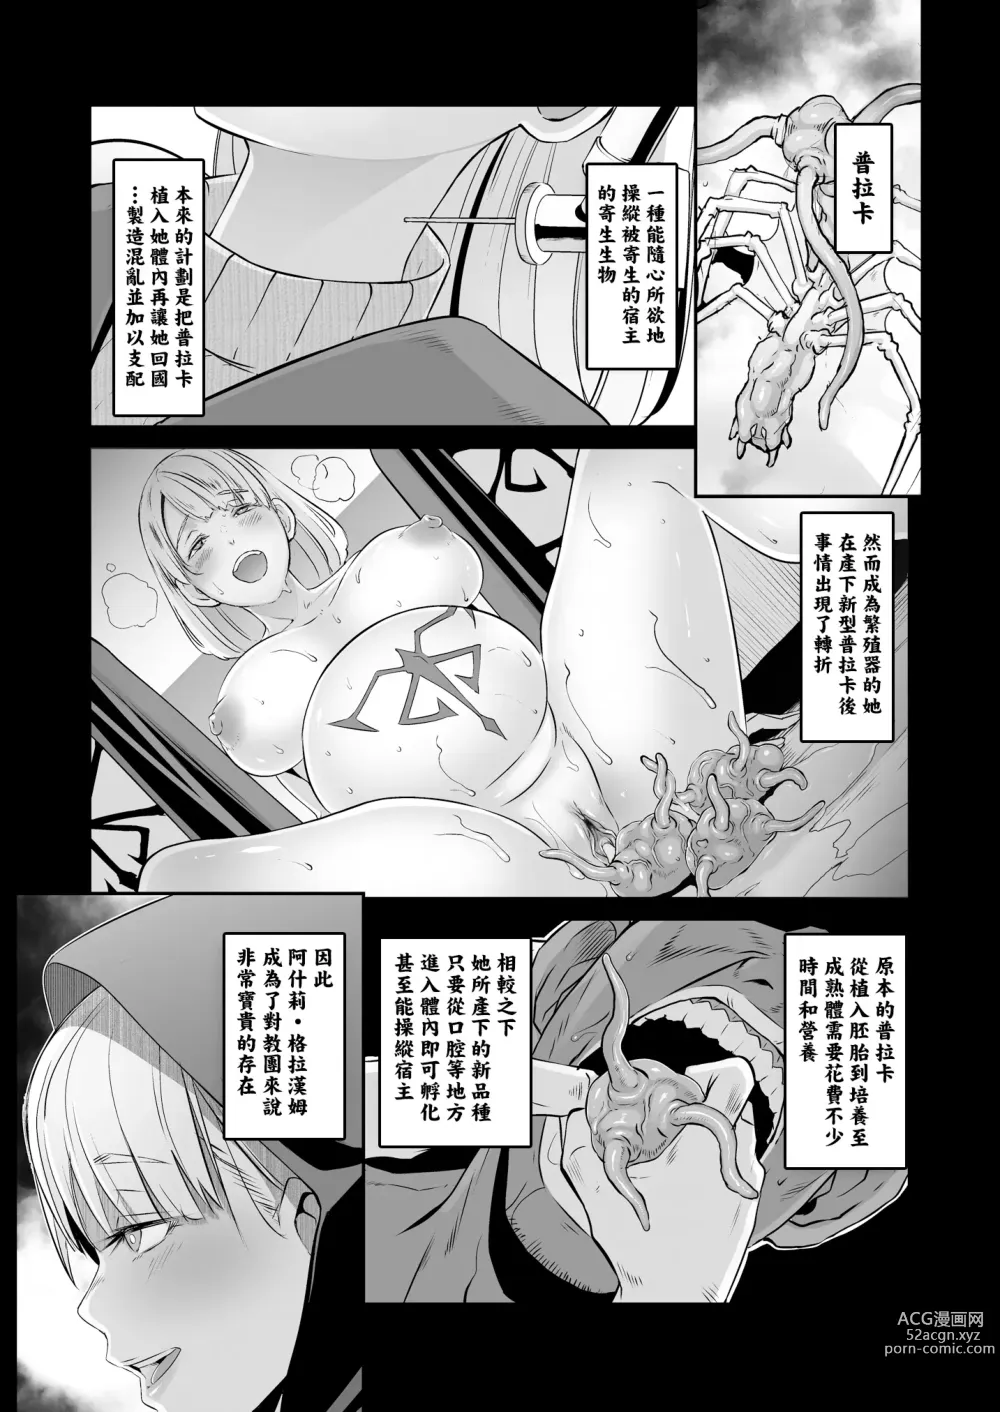 Page 32 of doujinshi GAMEOVERS-FILE1.1+2.0 (decensored)